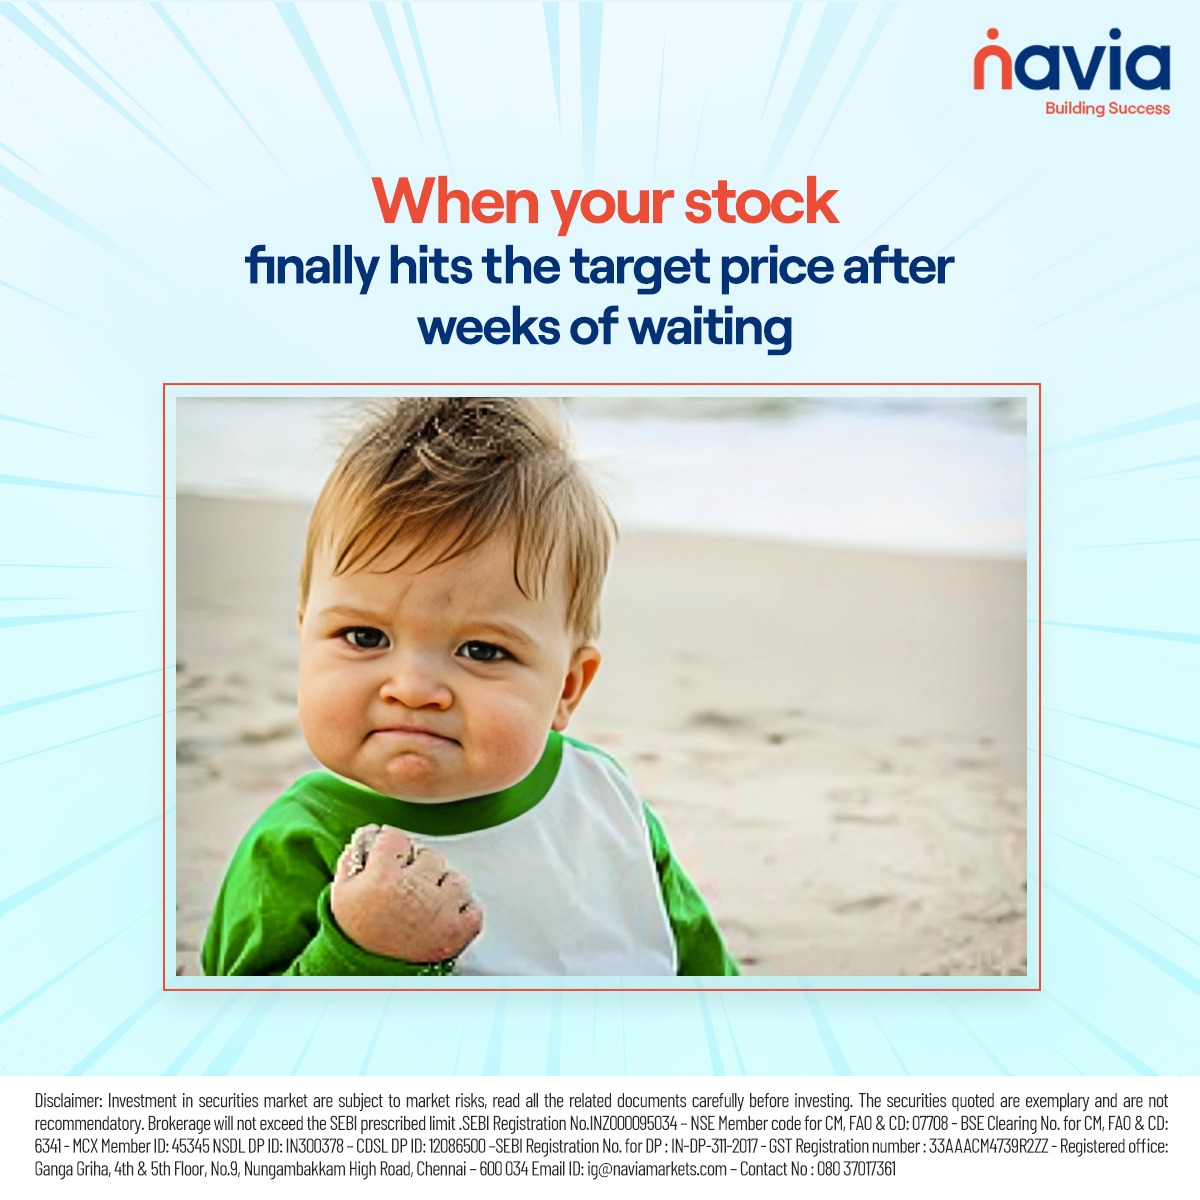 That feeling after finally seeing those numbers line up! Happens with you too? Tell us in the comments.

#Navia #TrustedTradingPartner #TradeSmart #FinancialFreedom #InvestingJourney #StockMarket #Trading #WealthCreation #TargetAchieved #StockMarketSuccess…